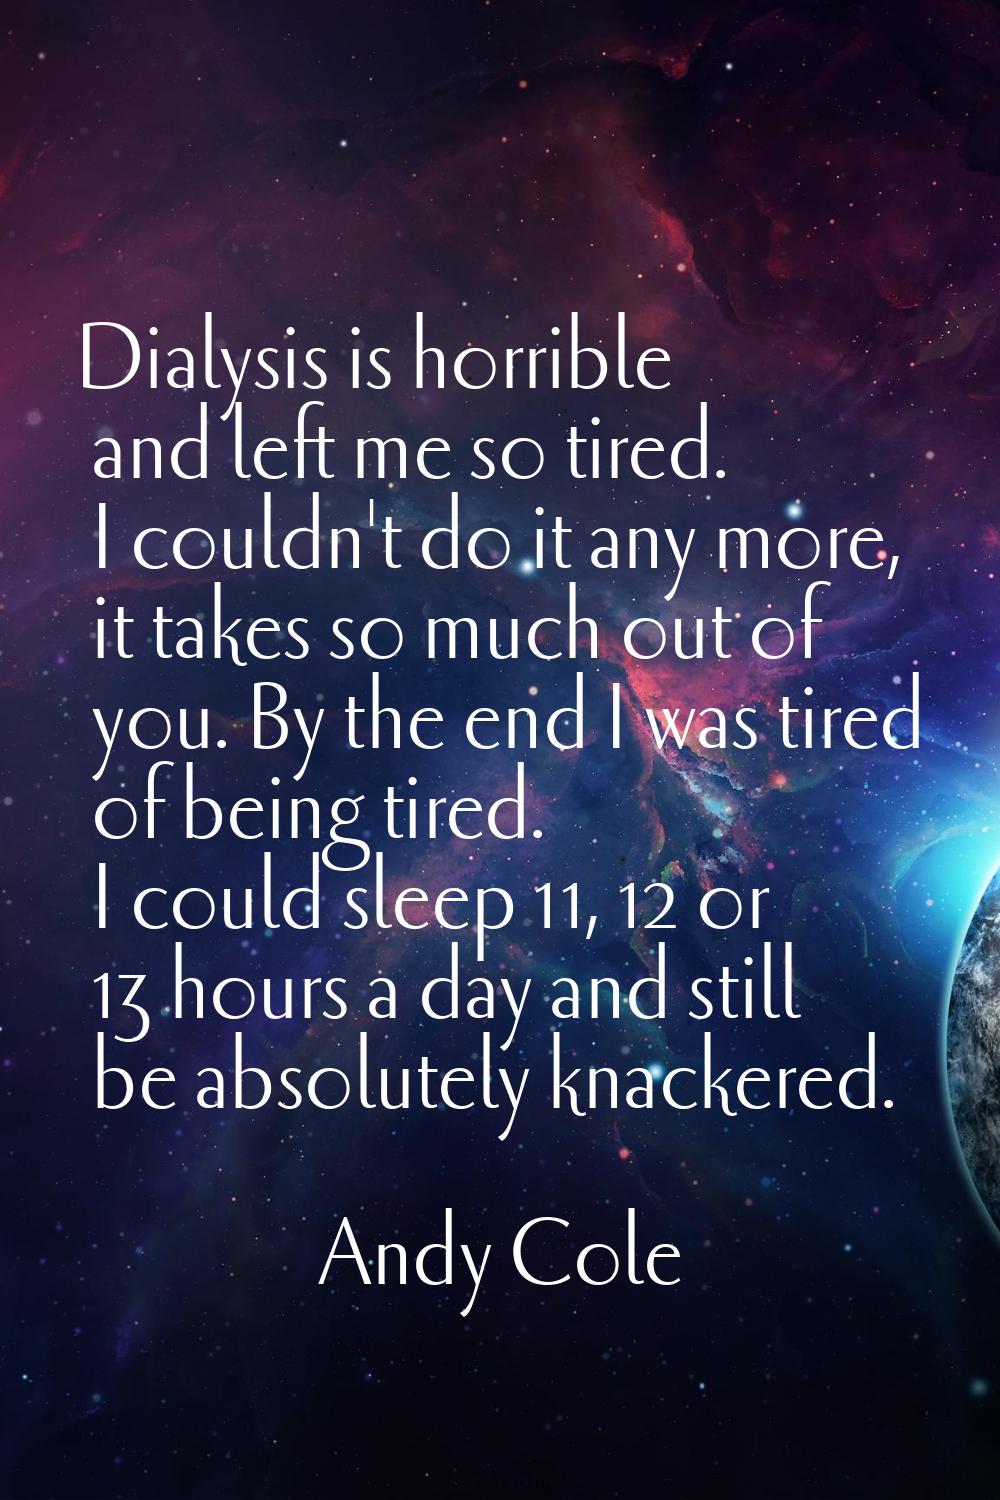 Dialysis is horrible and left me so tired. I couldn't do it any more, it takes so much out of you. 